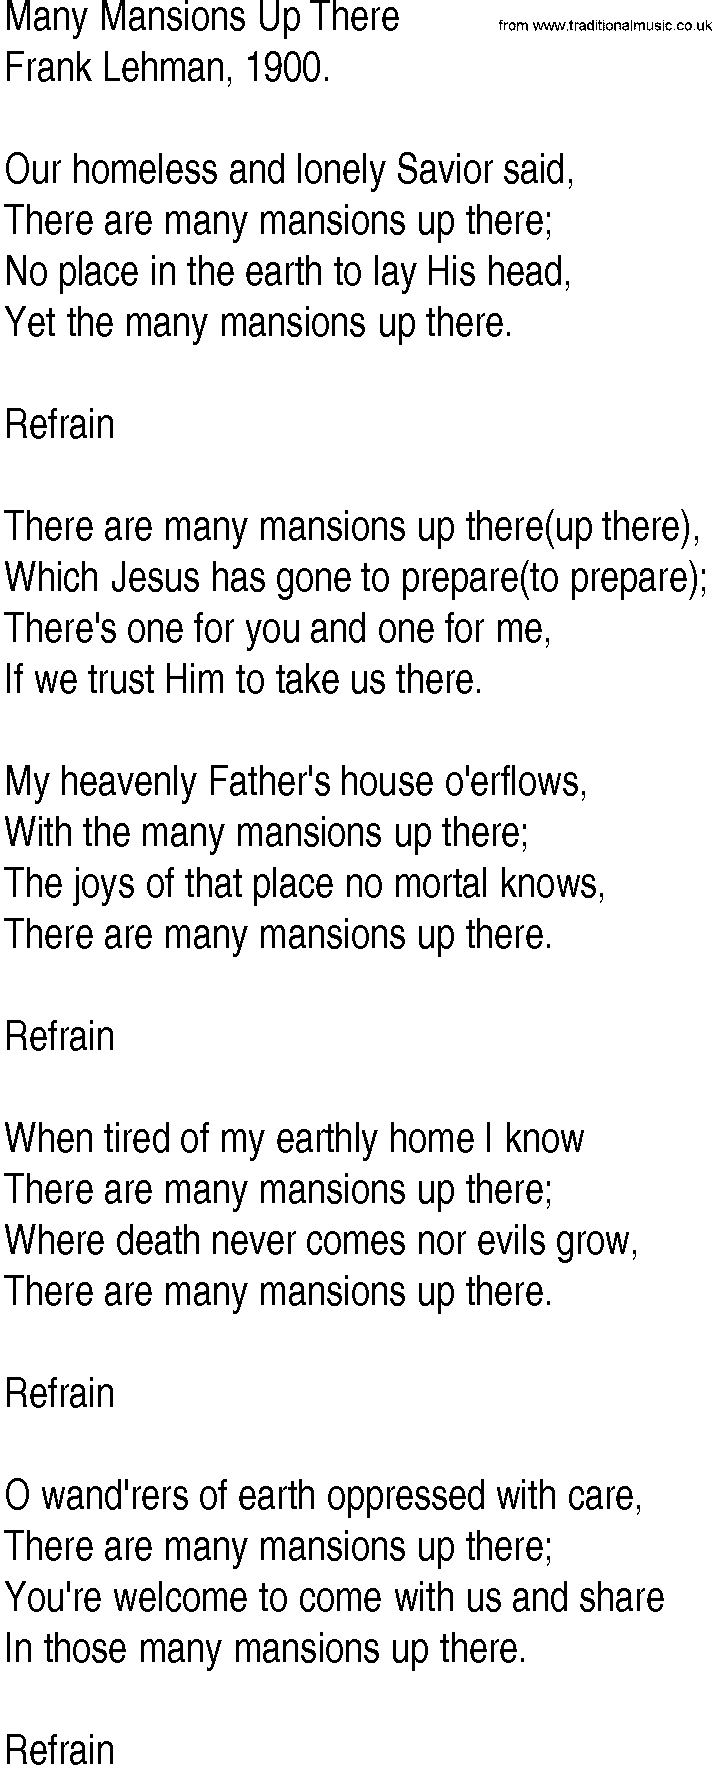 Hymn and Gospel Song: Many Mansions Up There by Frank Lehman lyrics